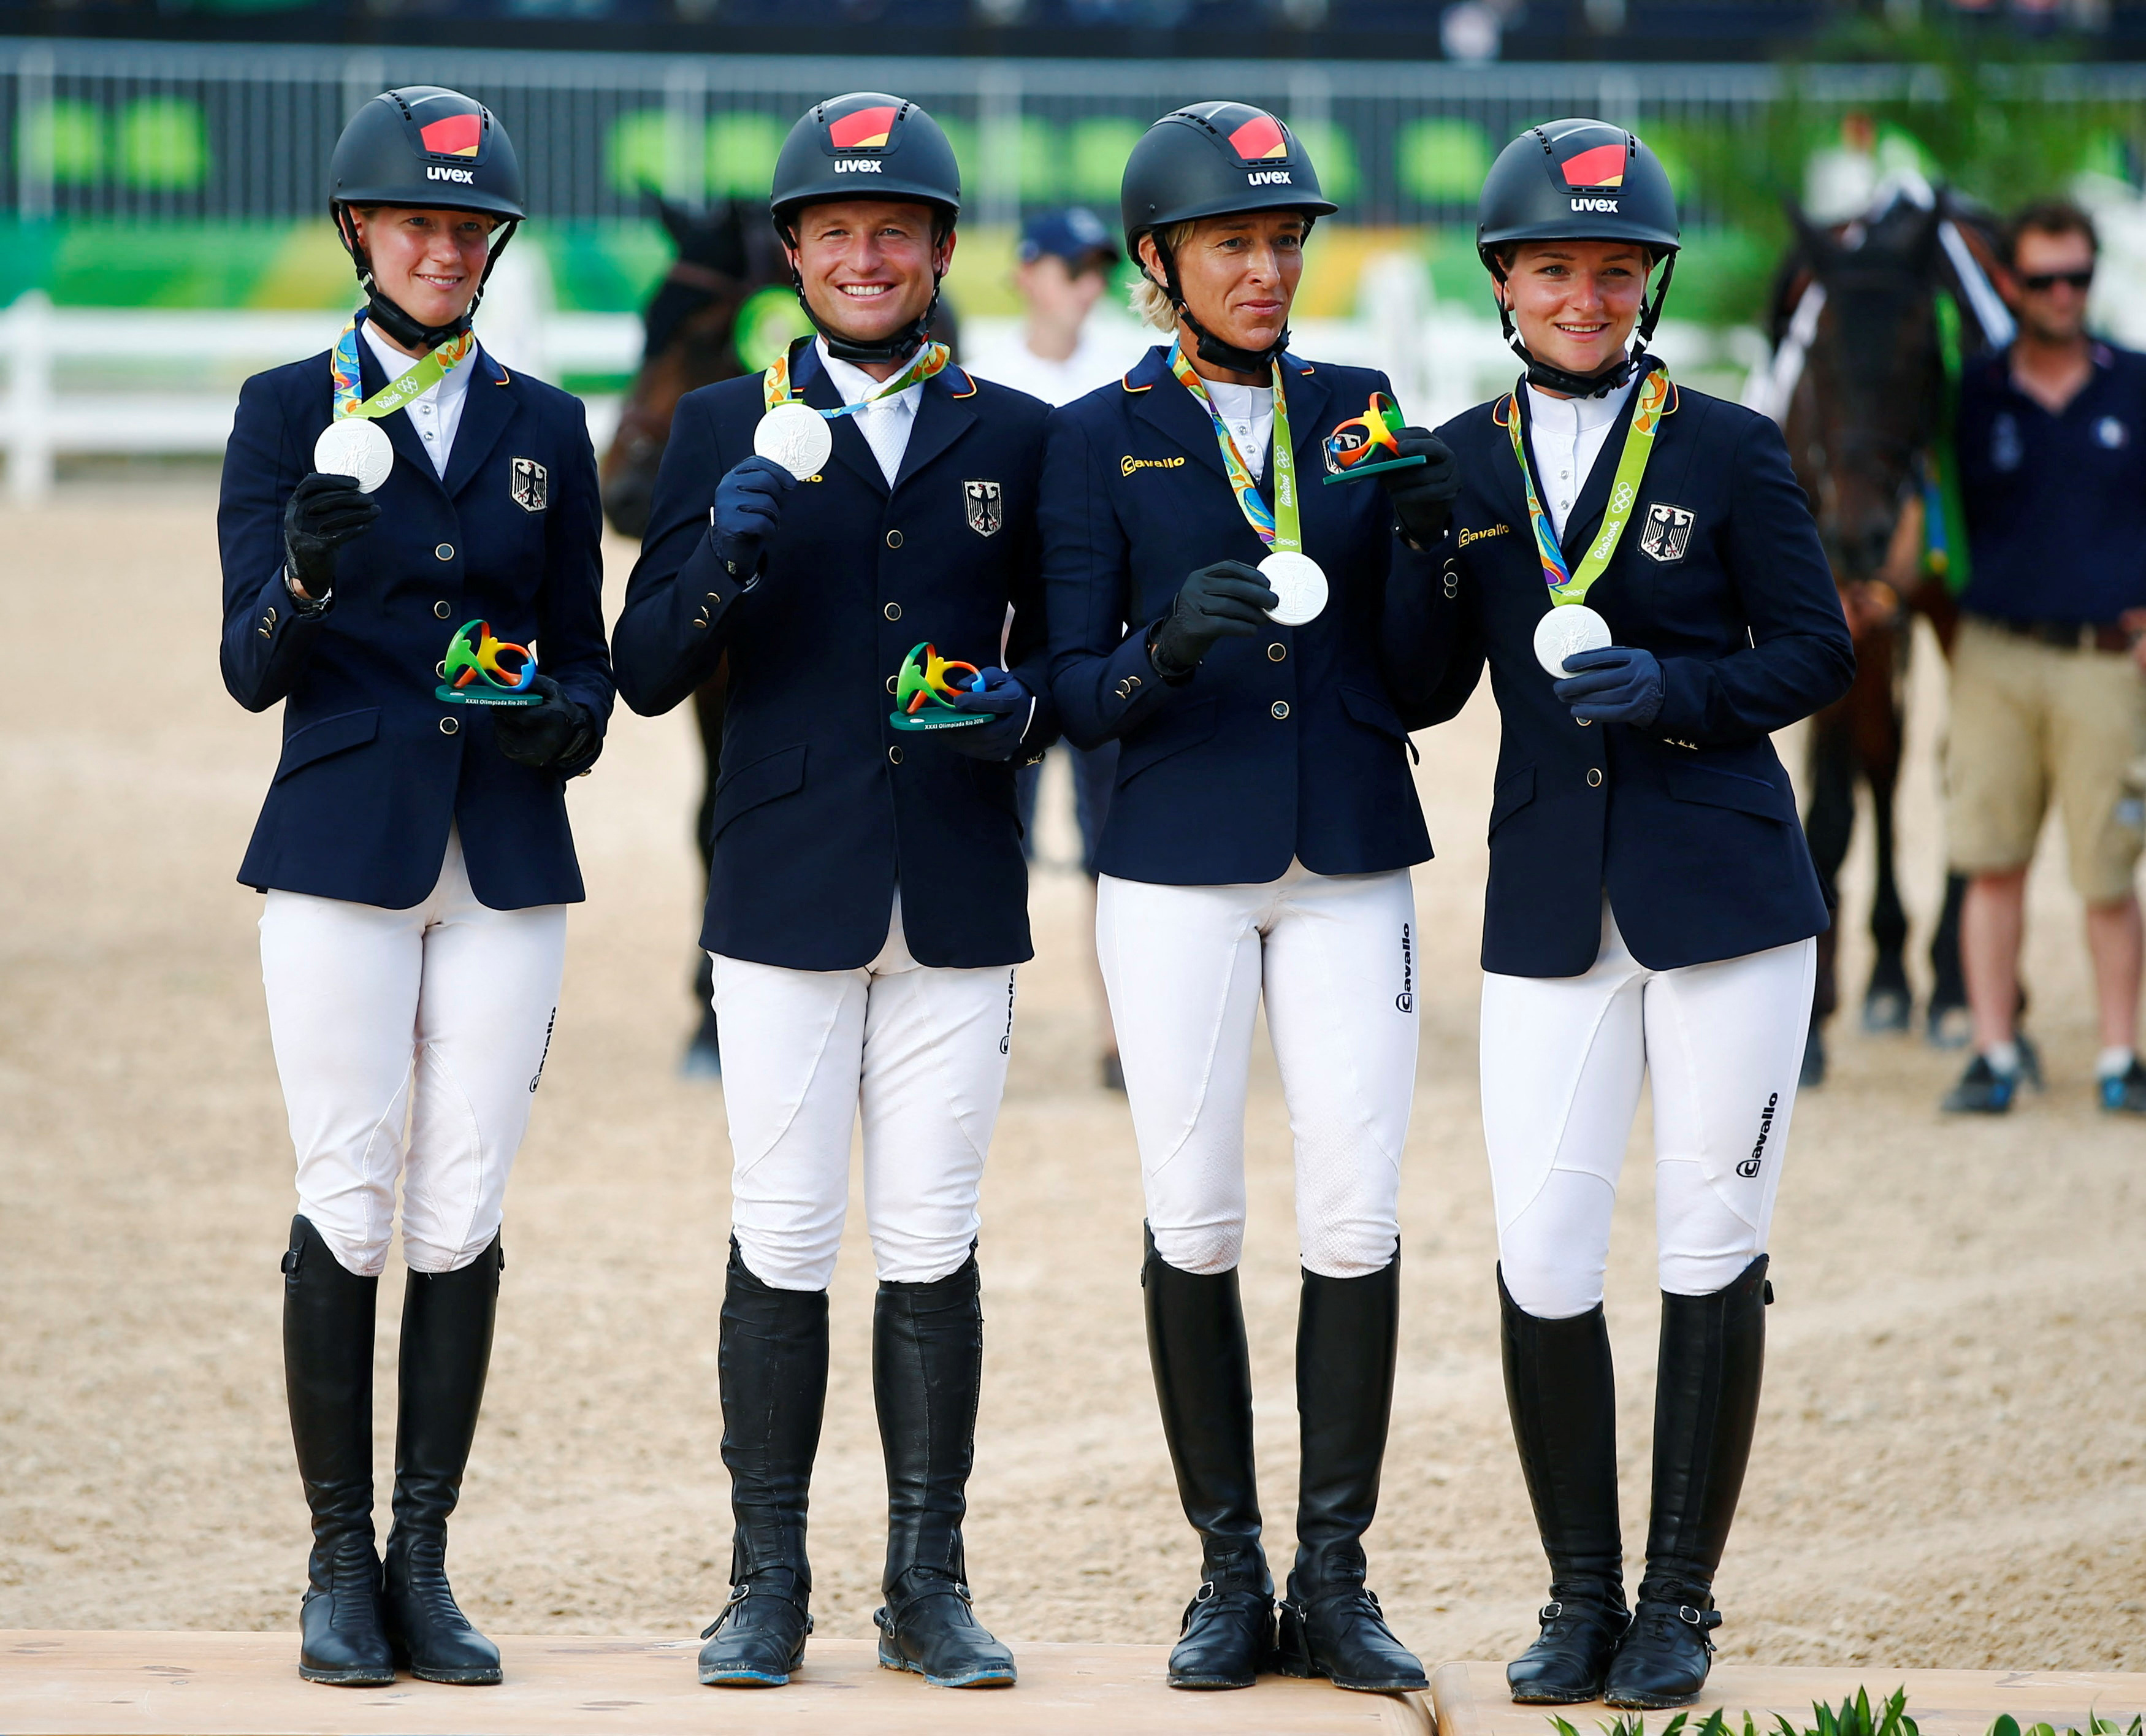 Equestrian - Eventing Team Victory Ceremony